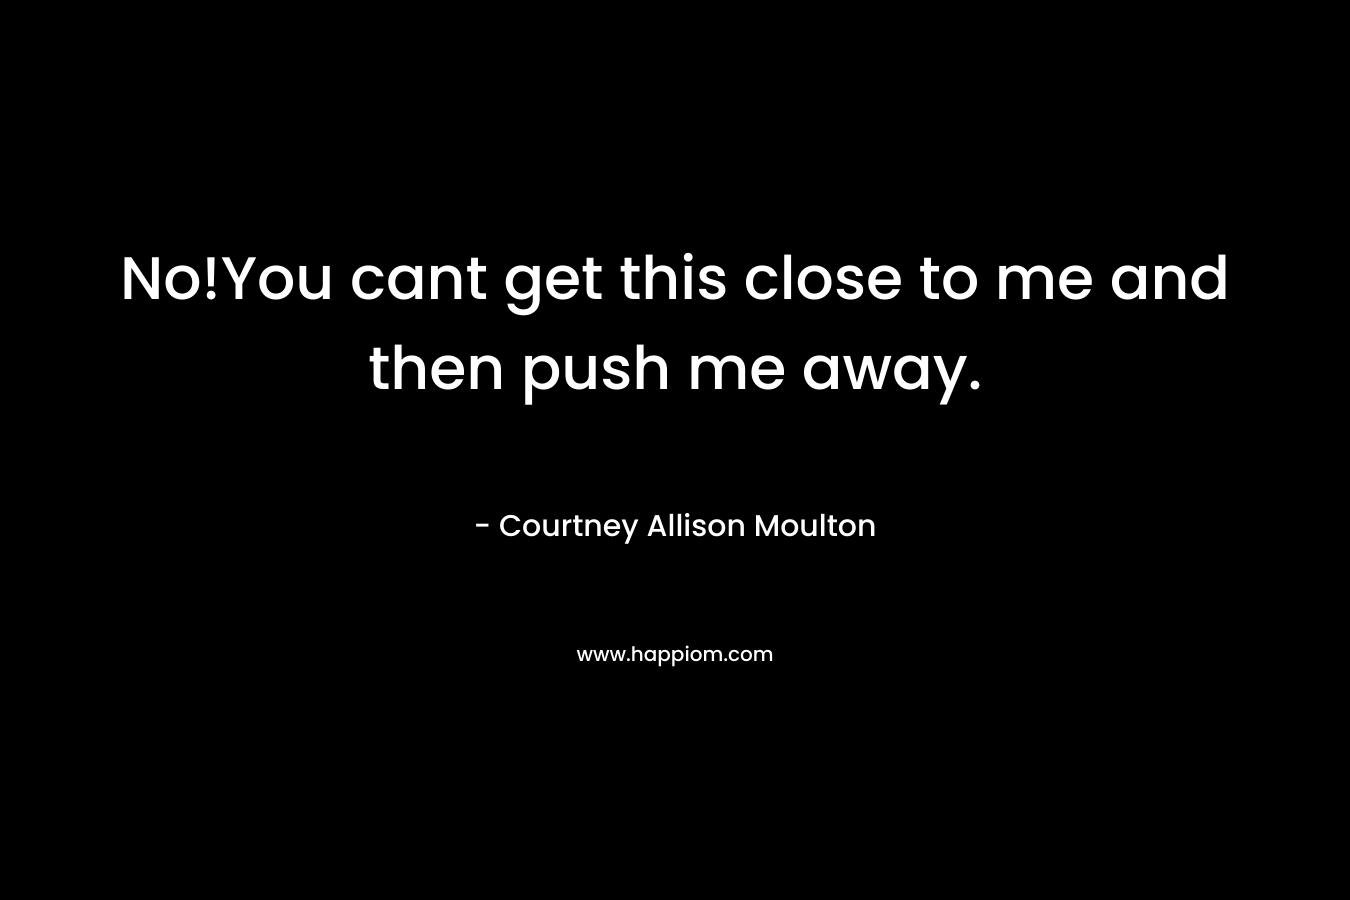 No!You cant get this close to me and then push me away. – Courtney Allison Moulton